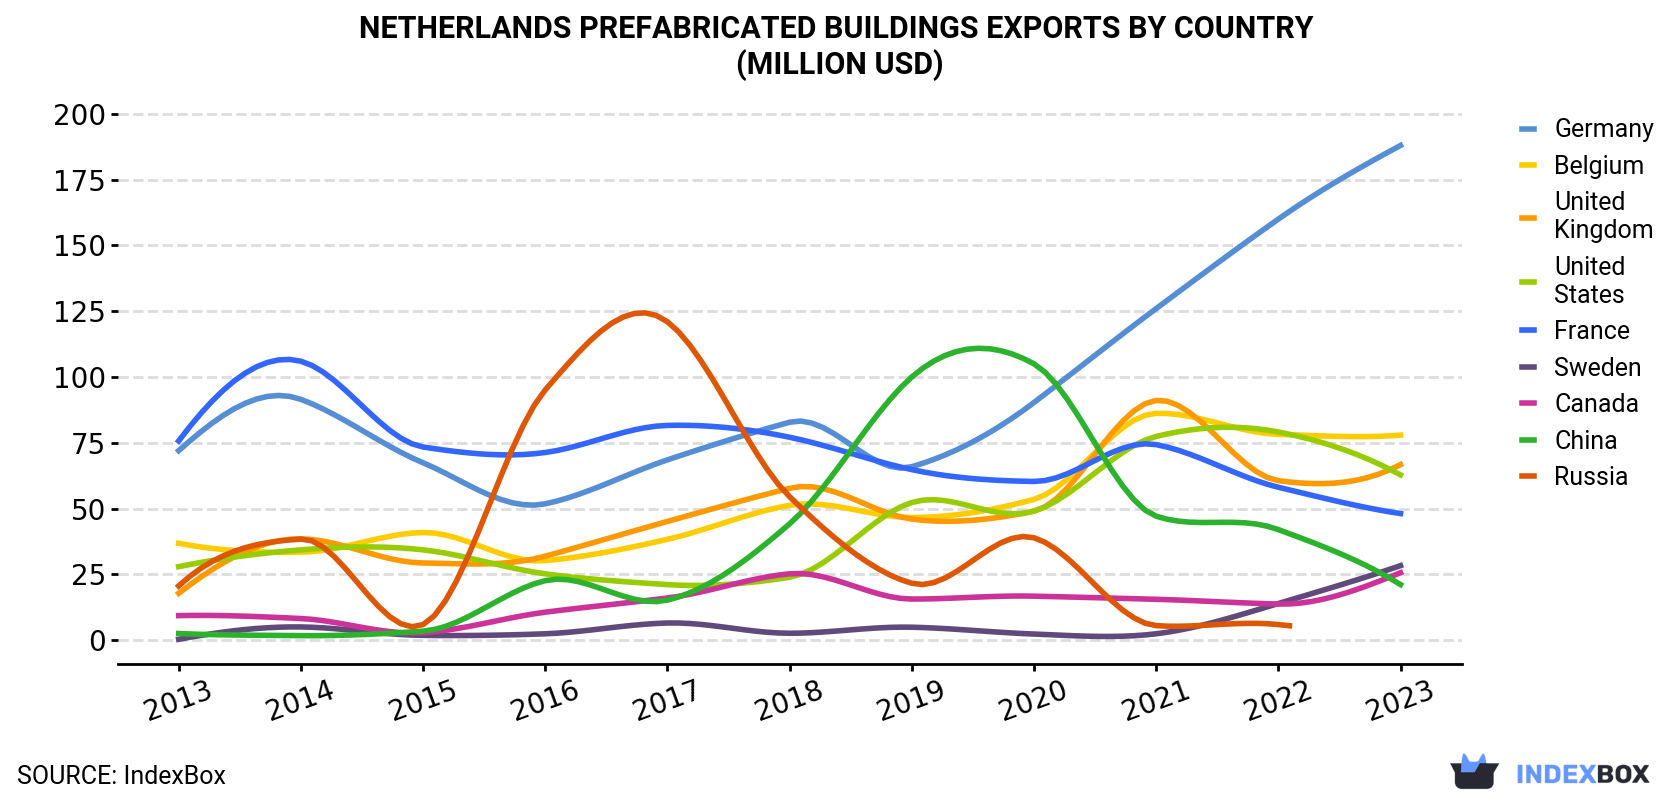 Netherlands Prefabricated Buildings Exports By Country (Million USD)